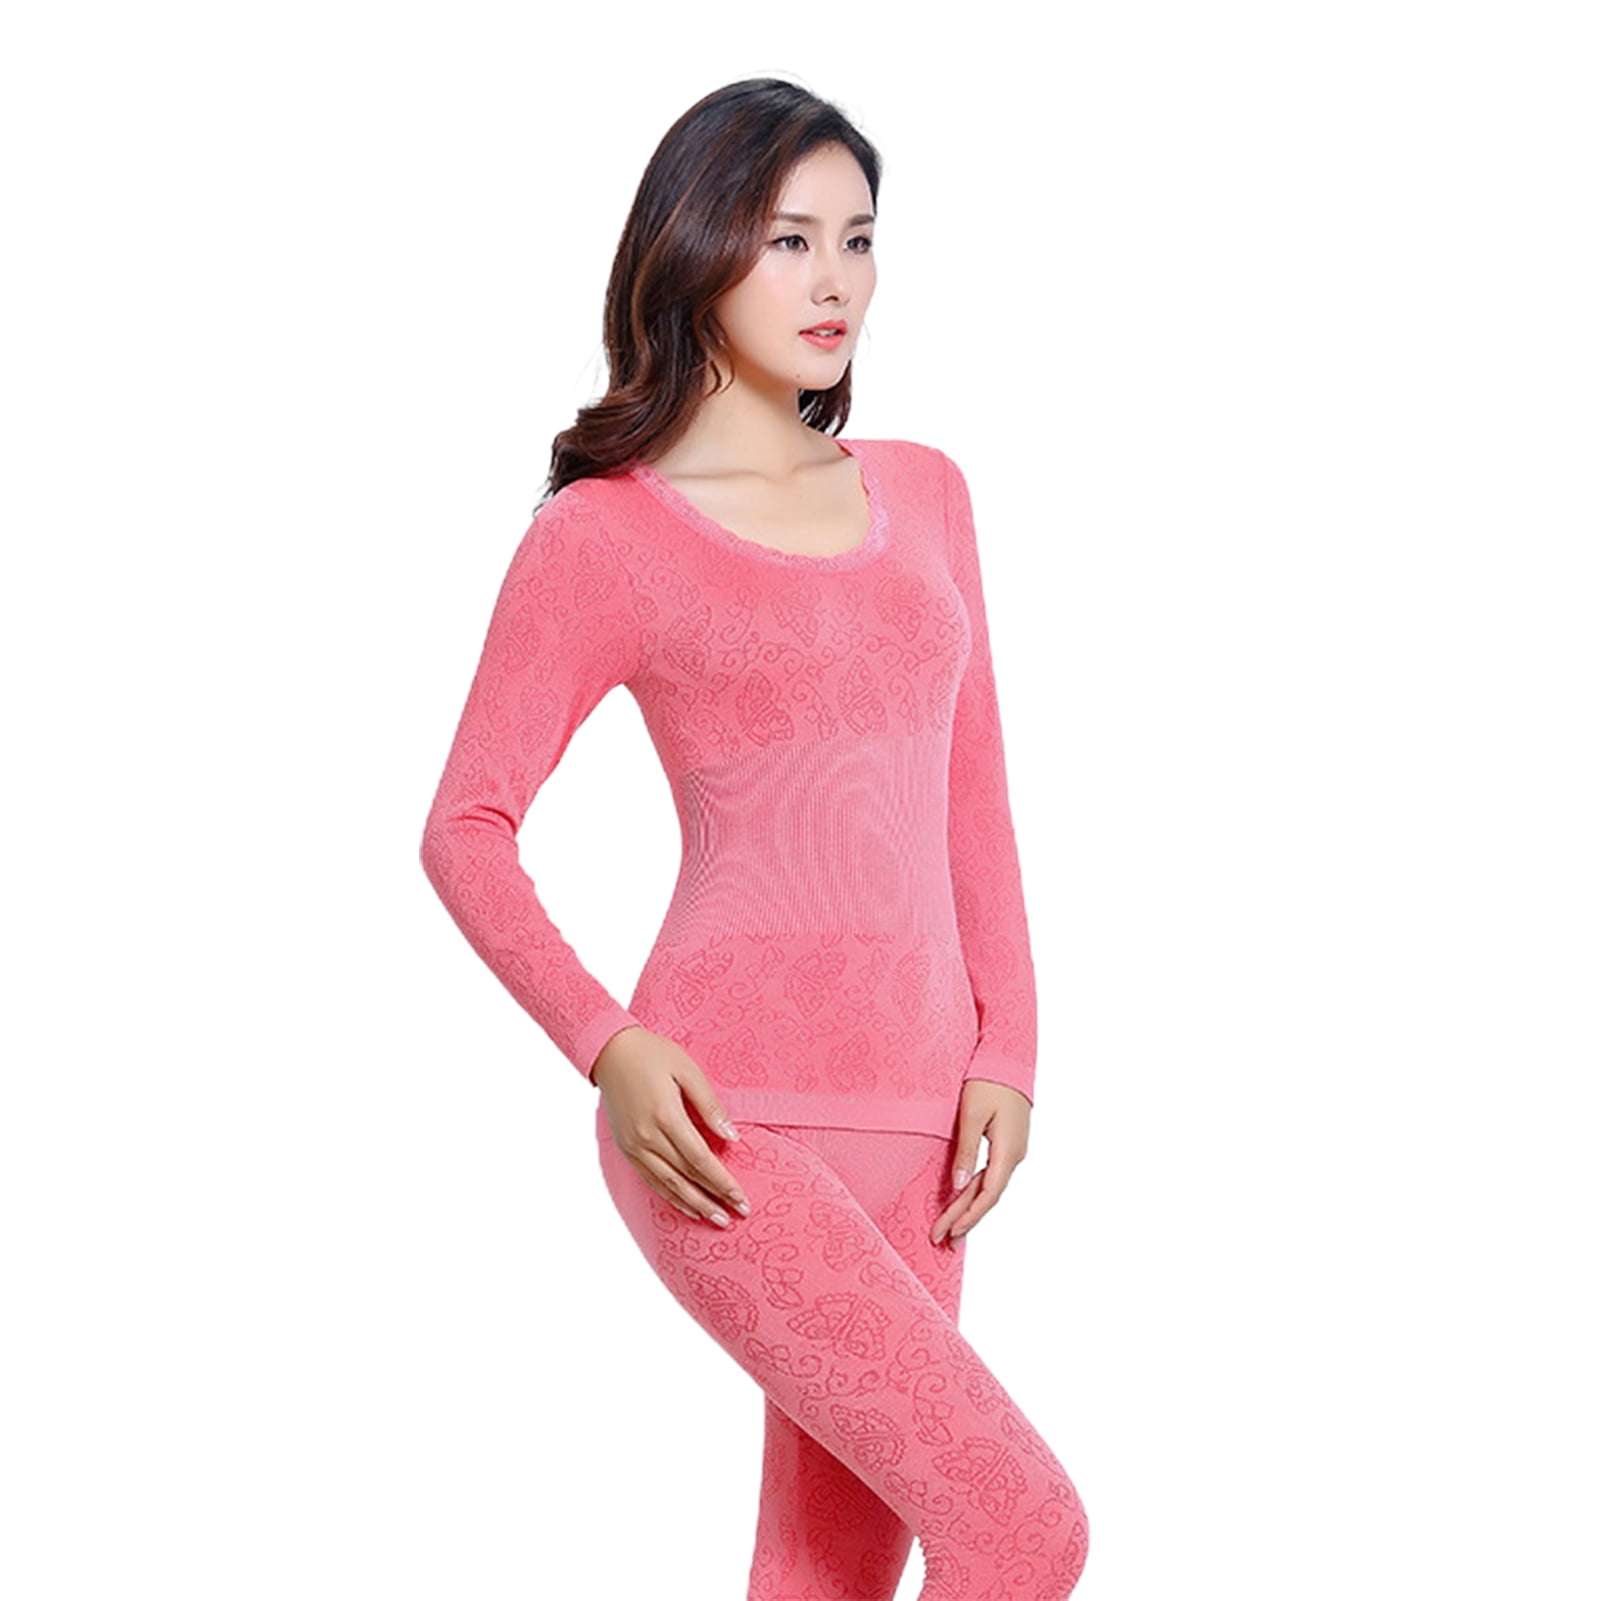 Best Deal in Canada  Trufit Womens Thermal Underwear Set-Assorted